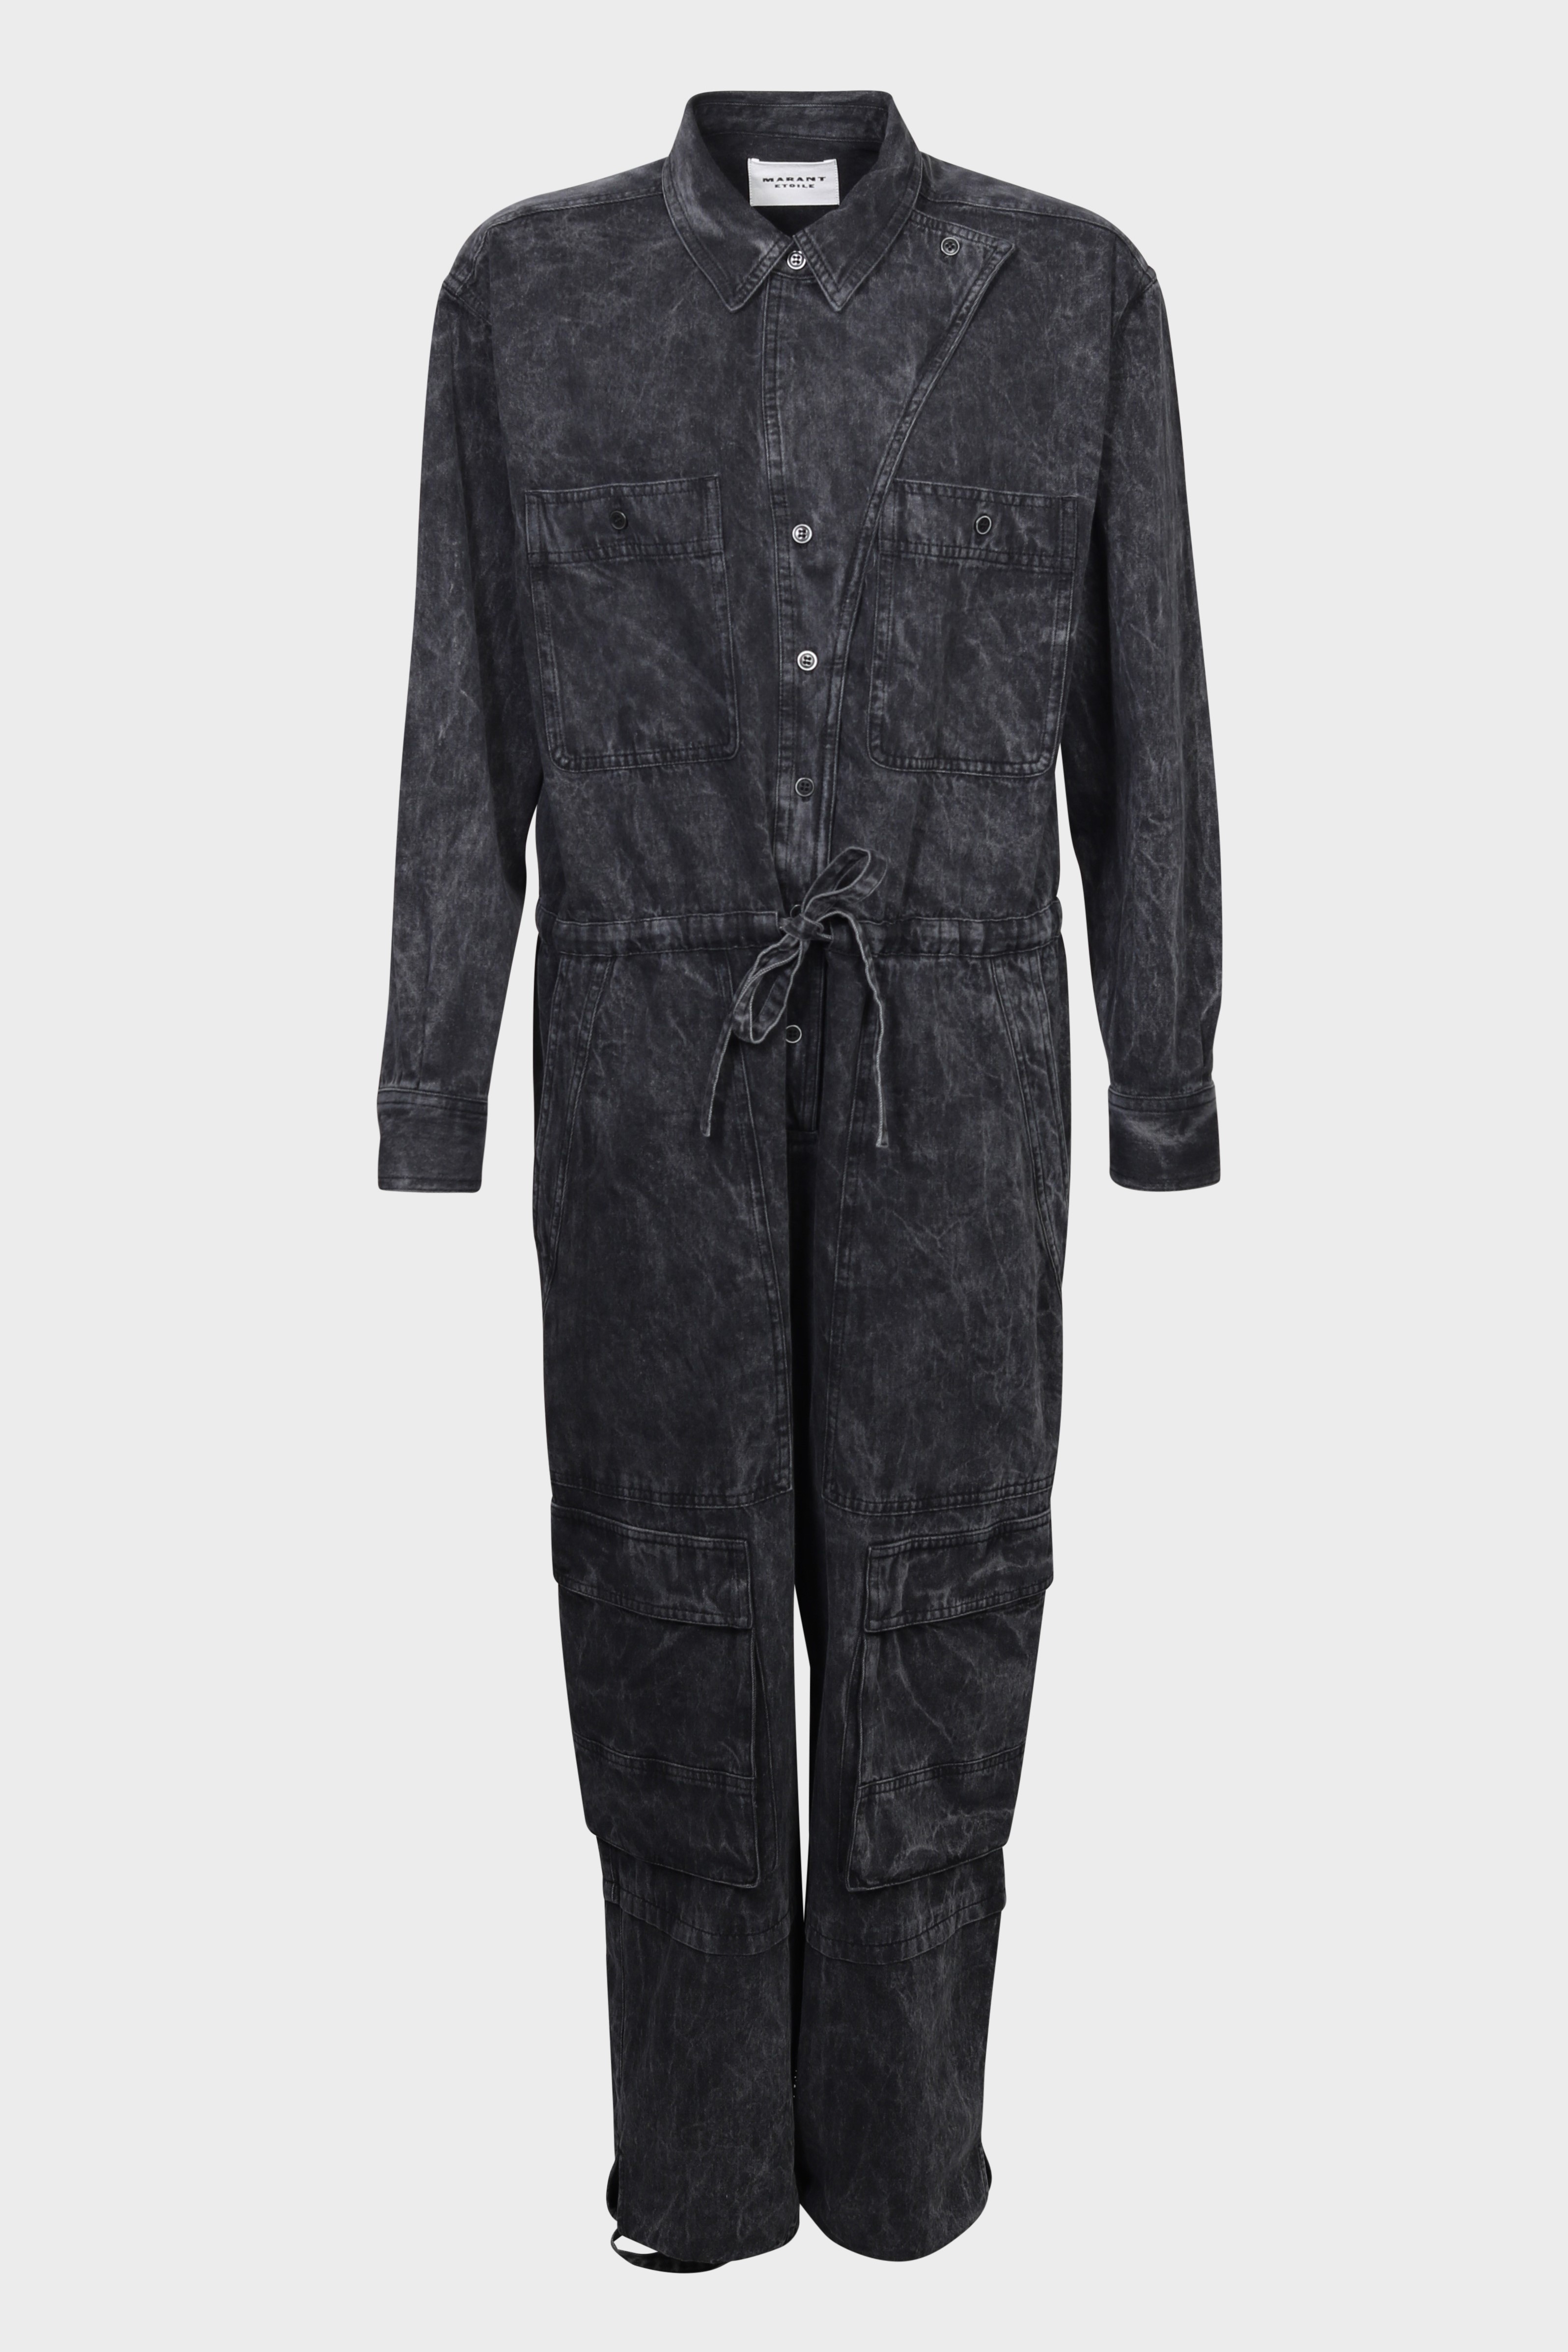 ISABEL MARANT ÉTOILE Idany Jumpsuit in Faded Black